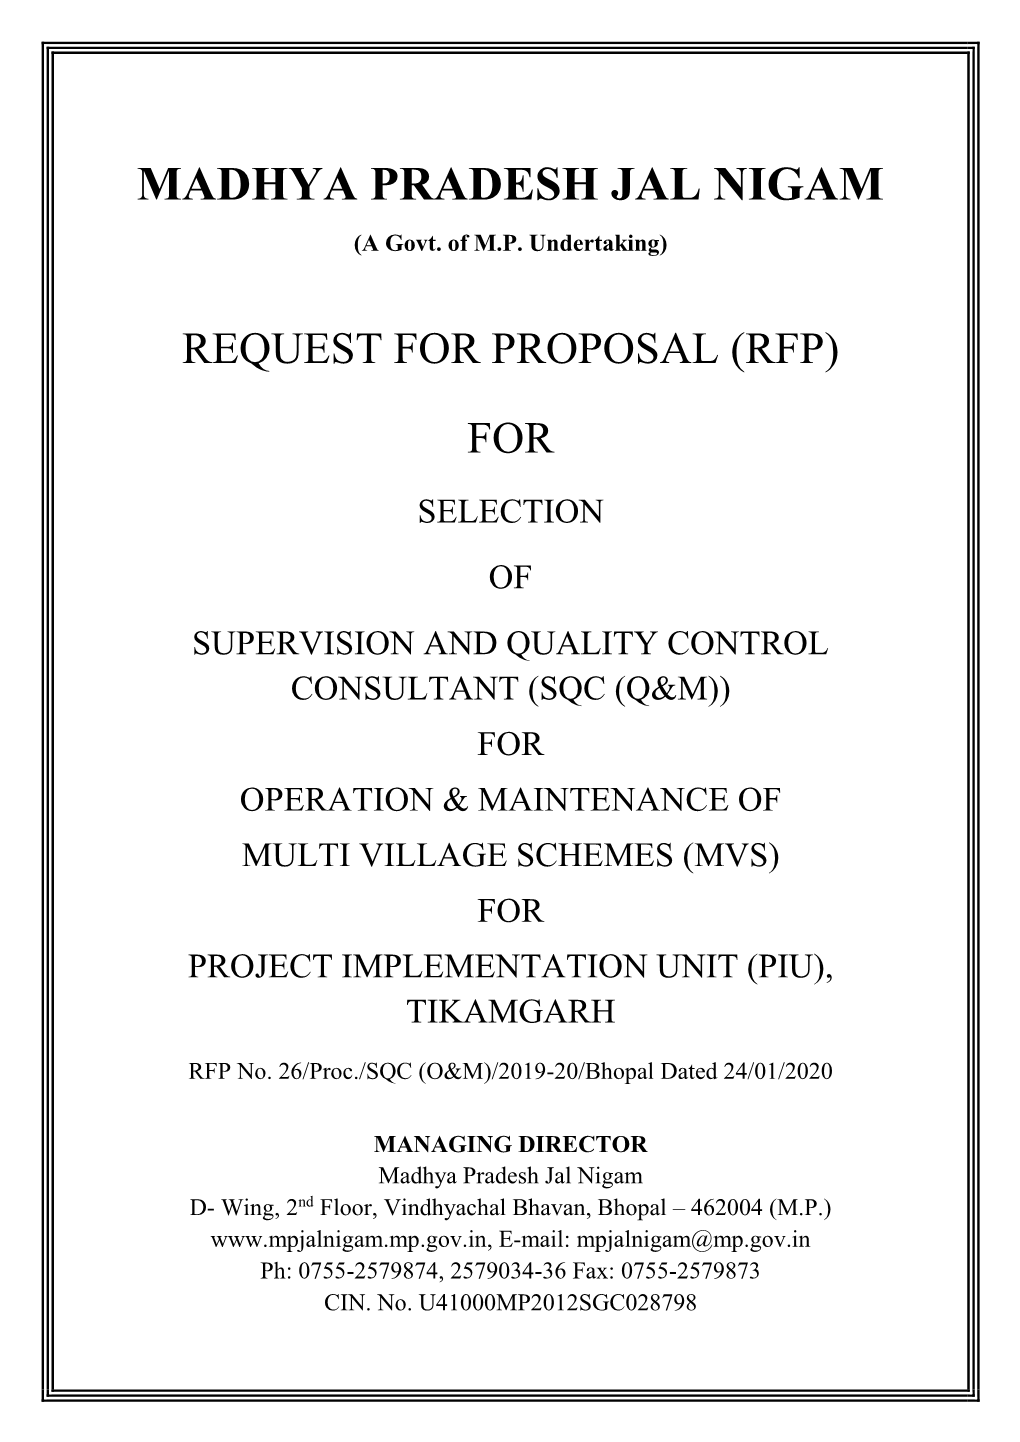 Request for Proposal (Rfp)